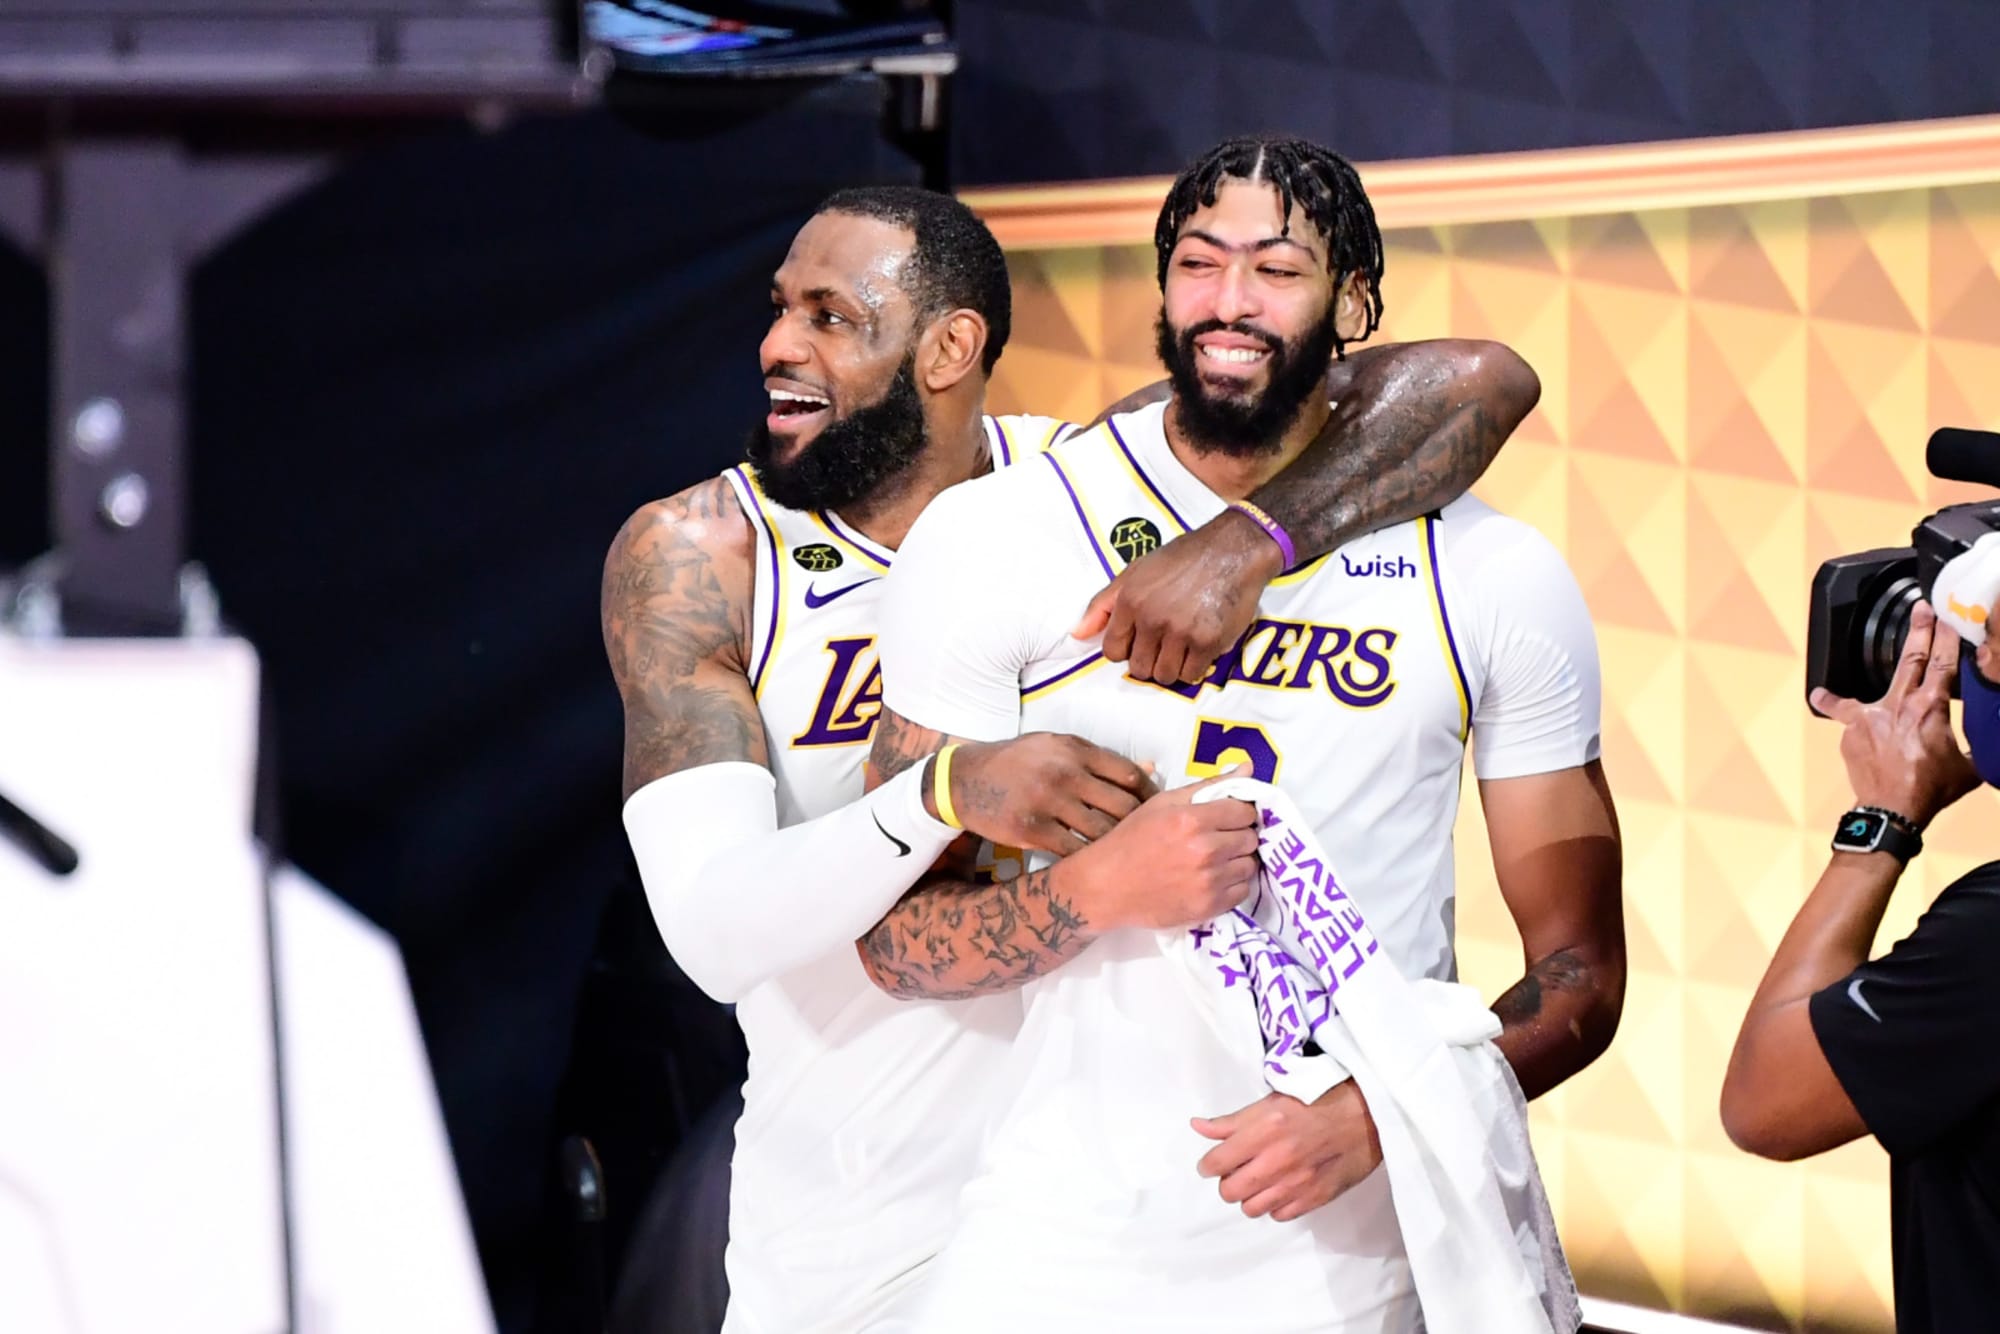 Los Angeles Lakers are finally the 2020 NBA Champions